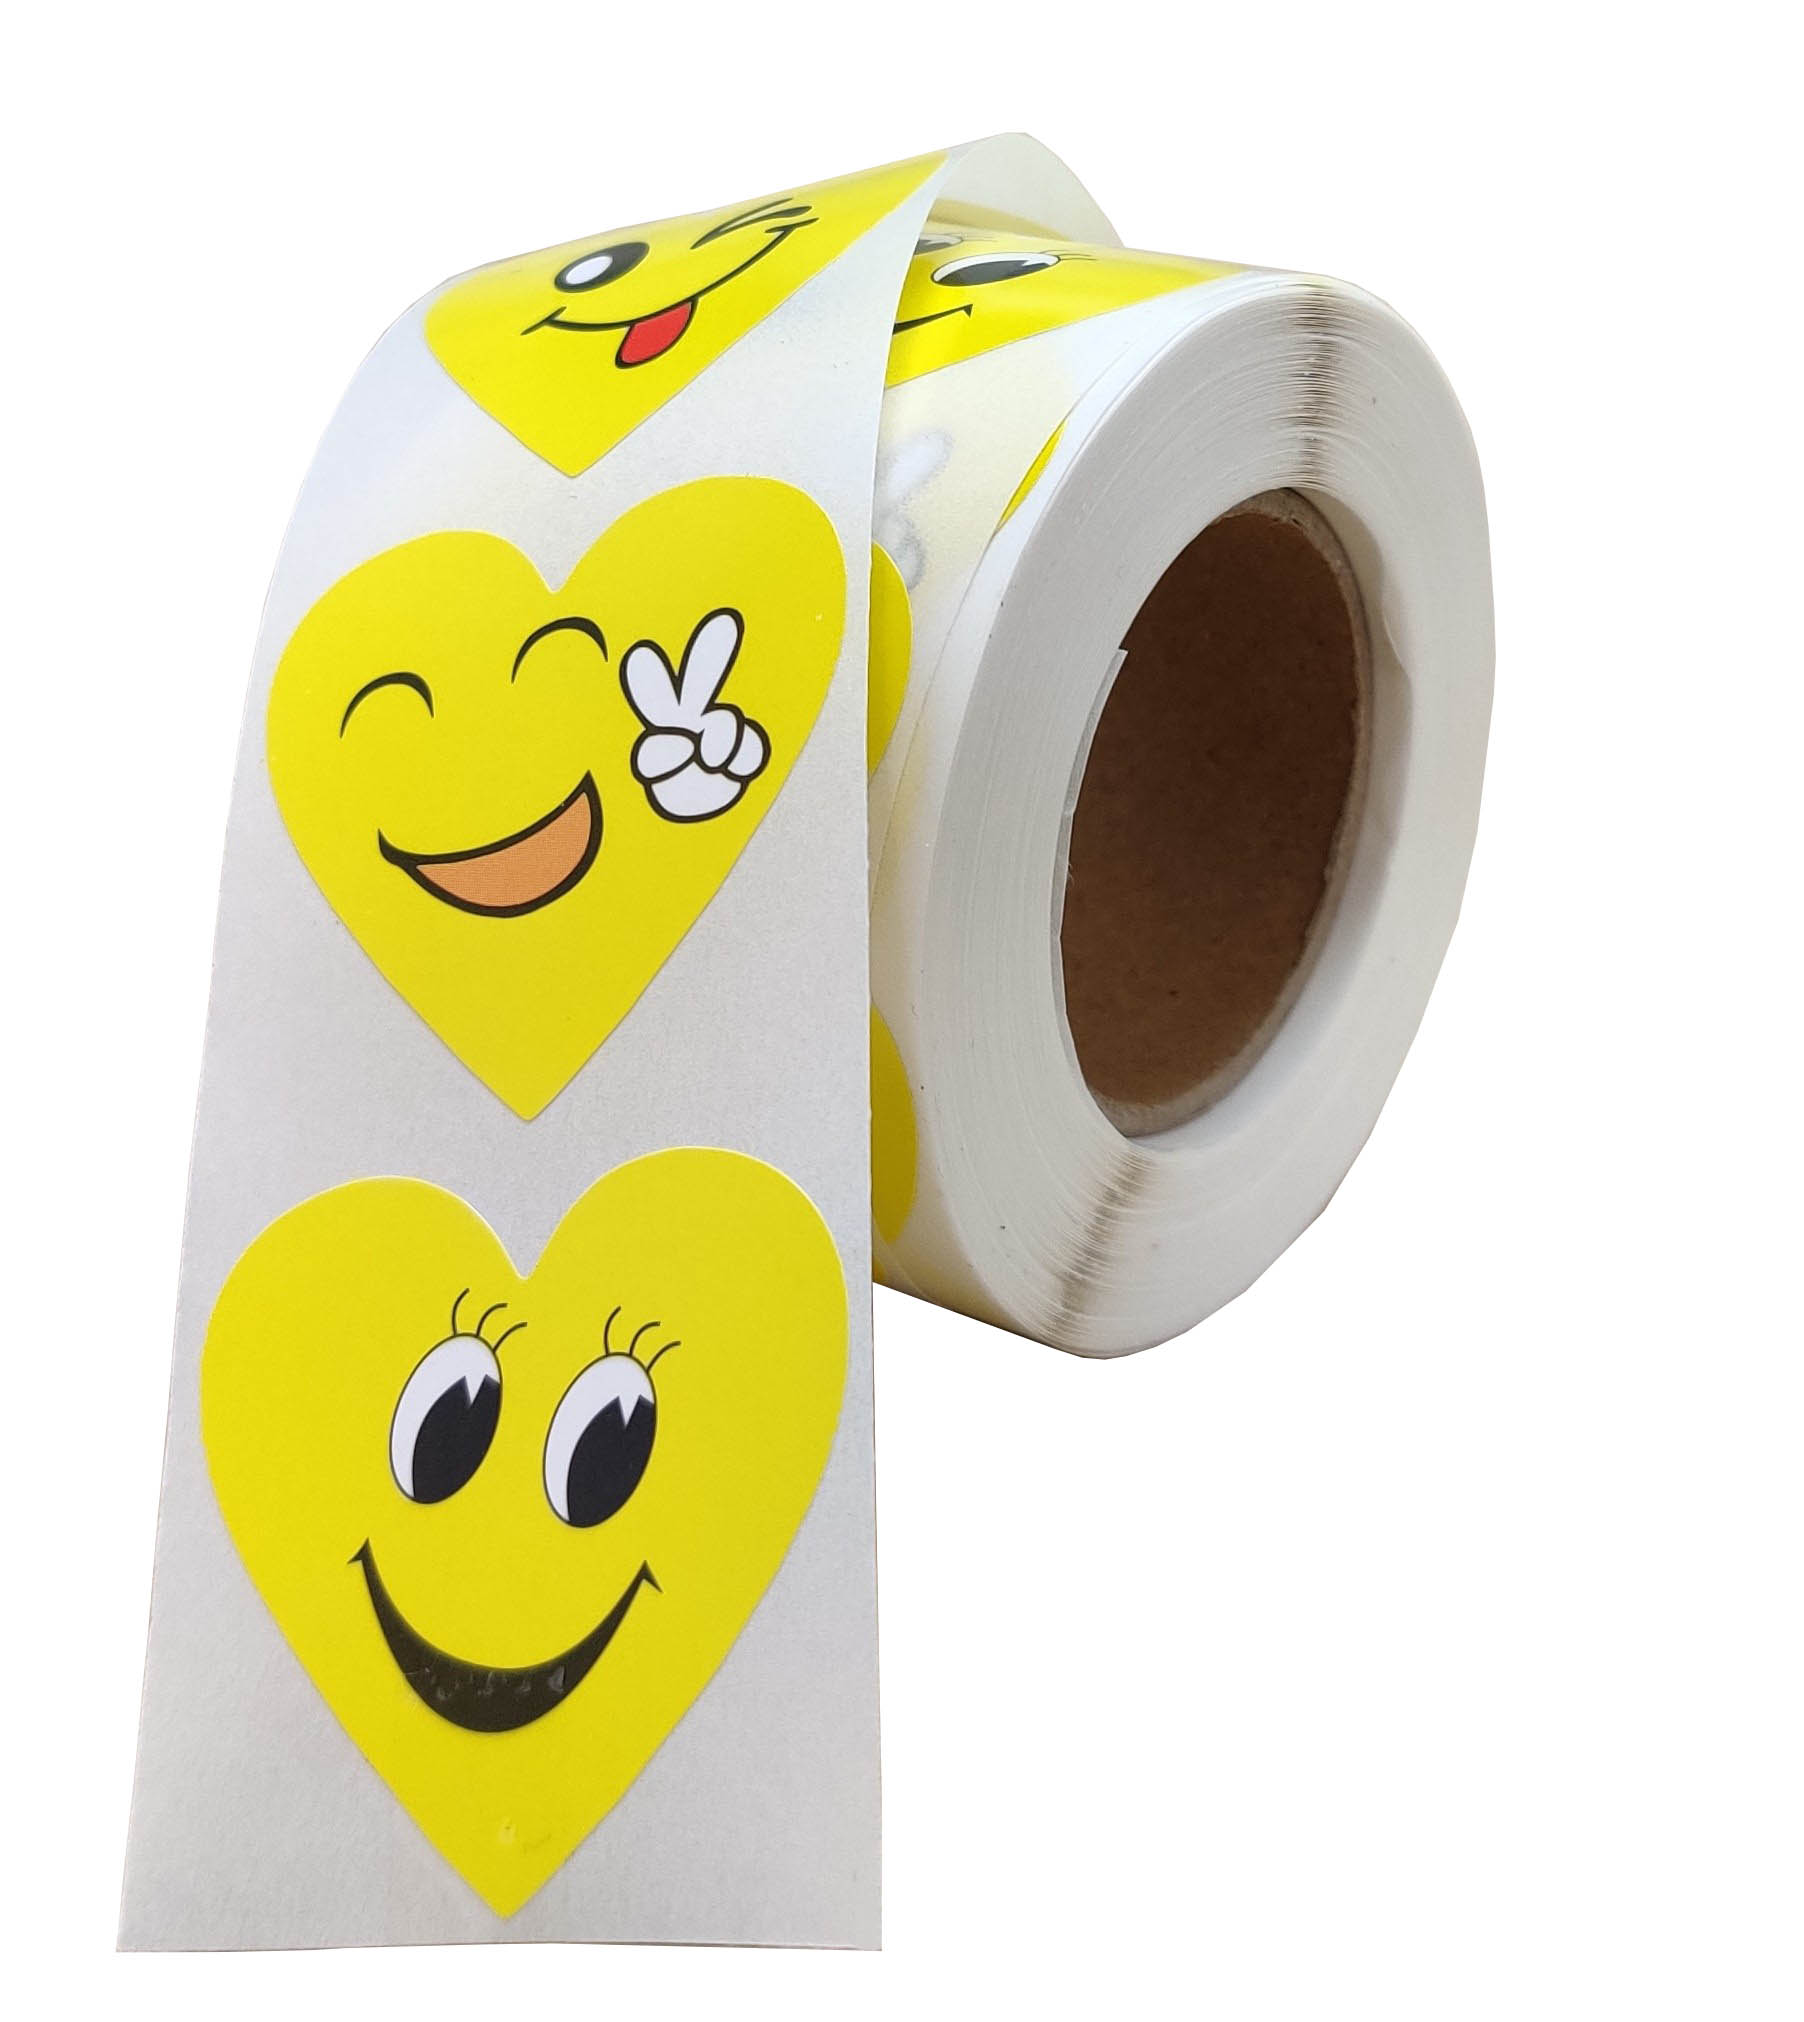 TOYANDONA Smiley Face Stickers Roll Happy Face Stickers Circle Dots Paper Labels Reward Stickers Teachers Stickers 1000 Pieces Per Roll